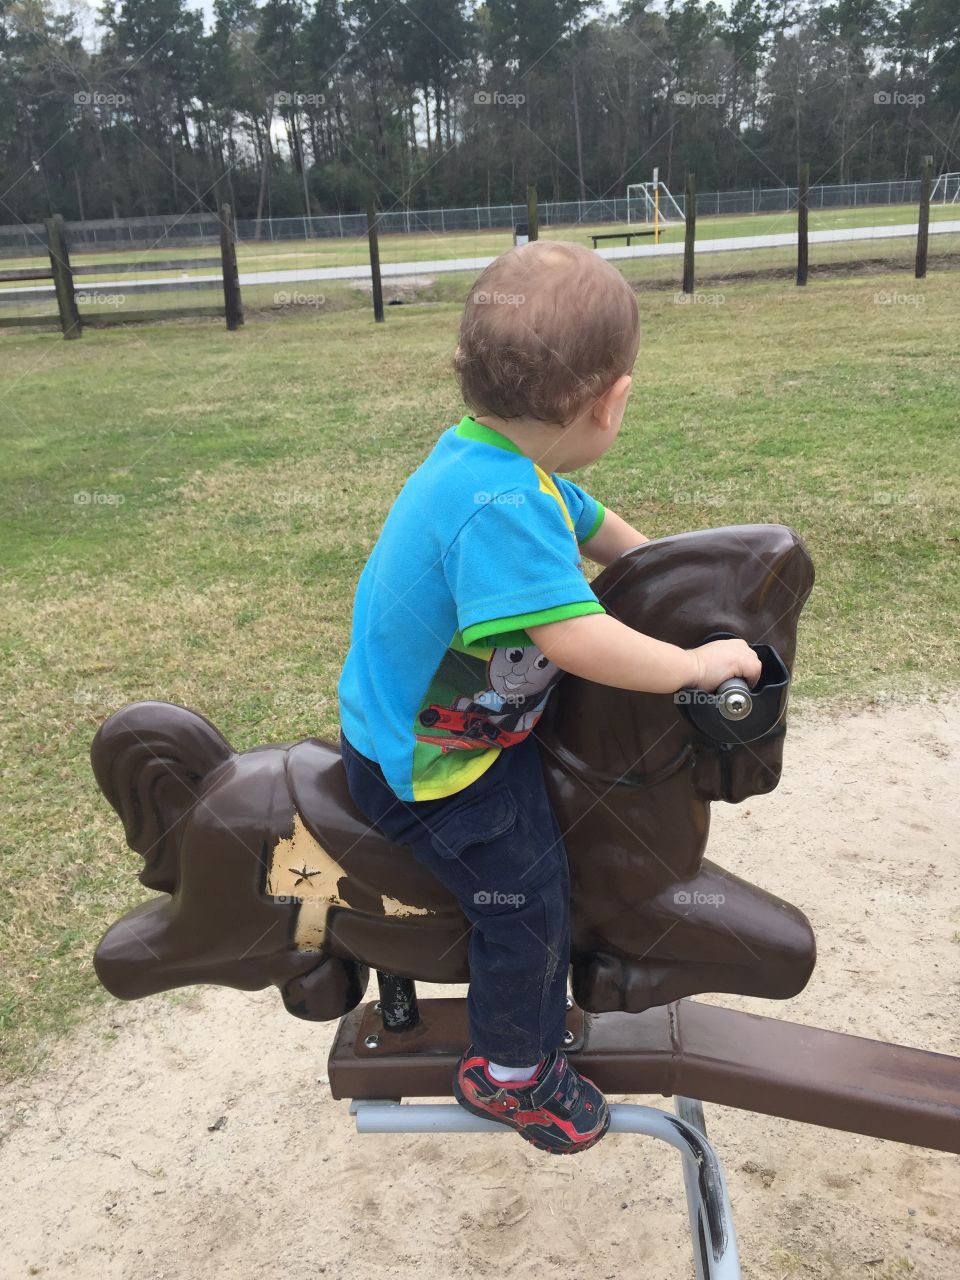 Grandson playing at the park in new Caney Texas on the bouncing horse